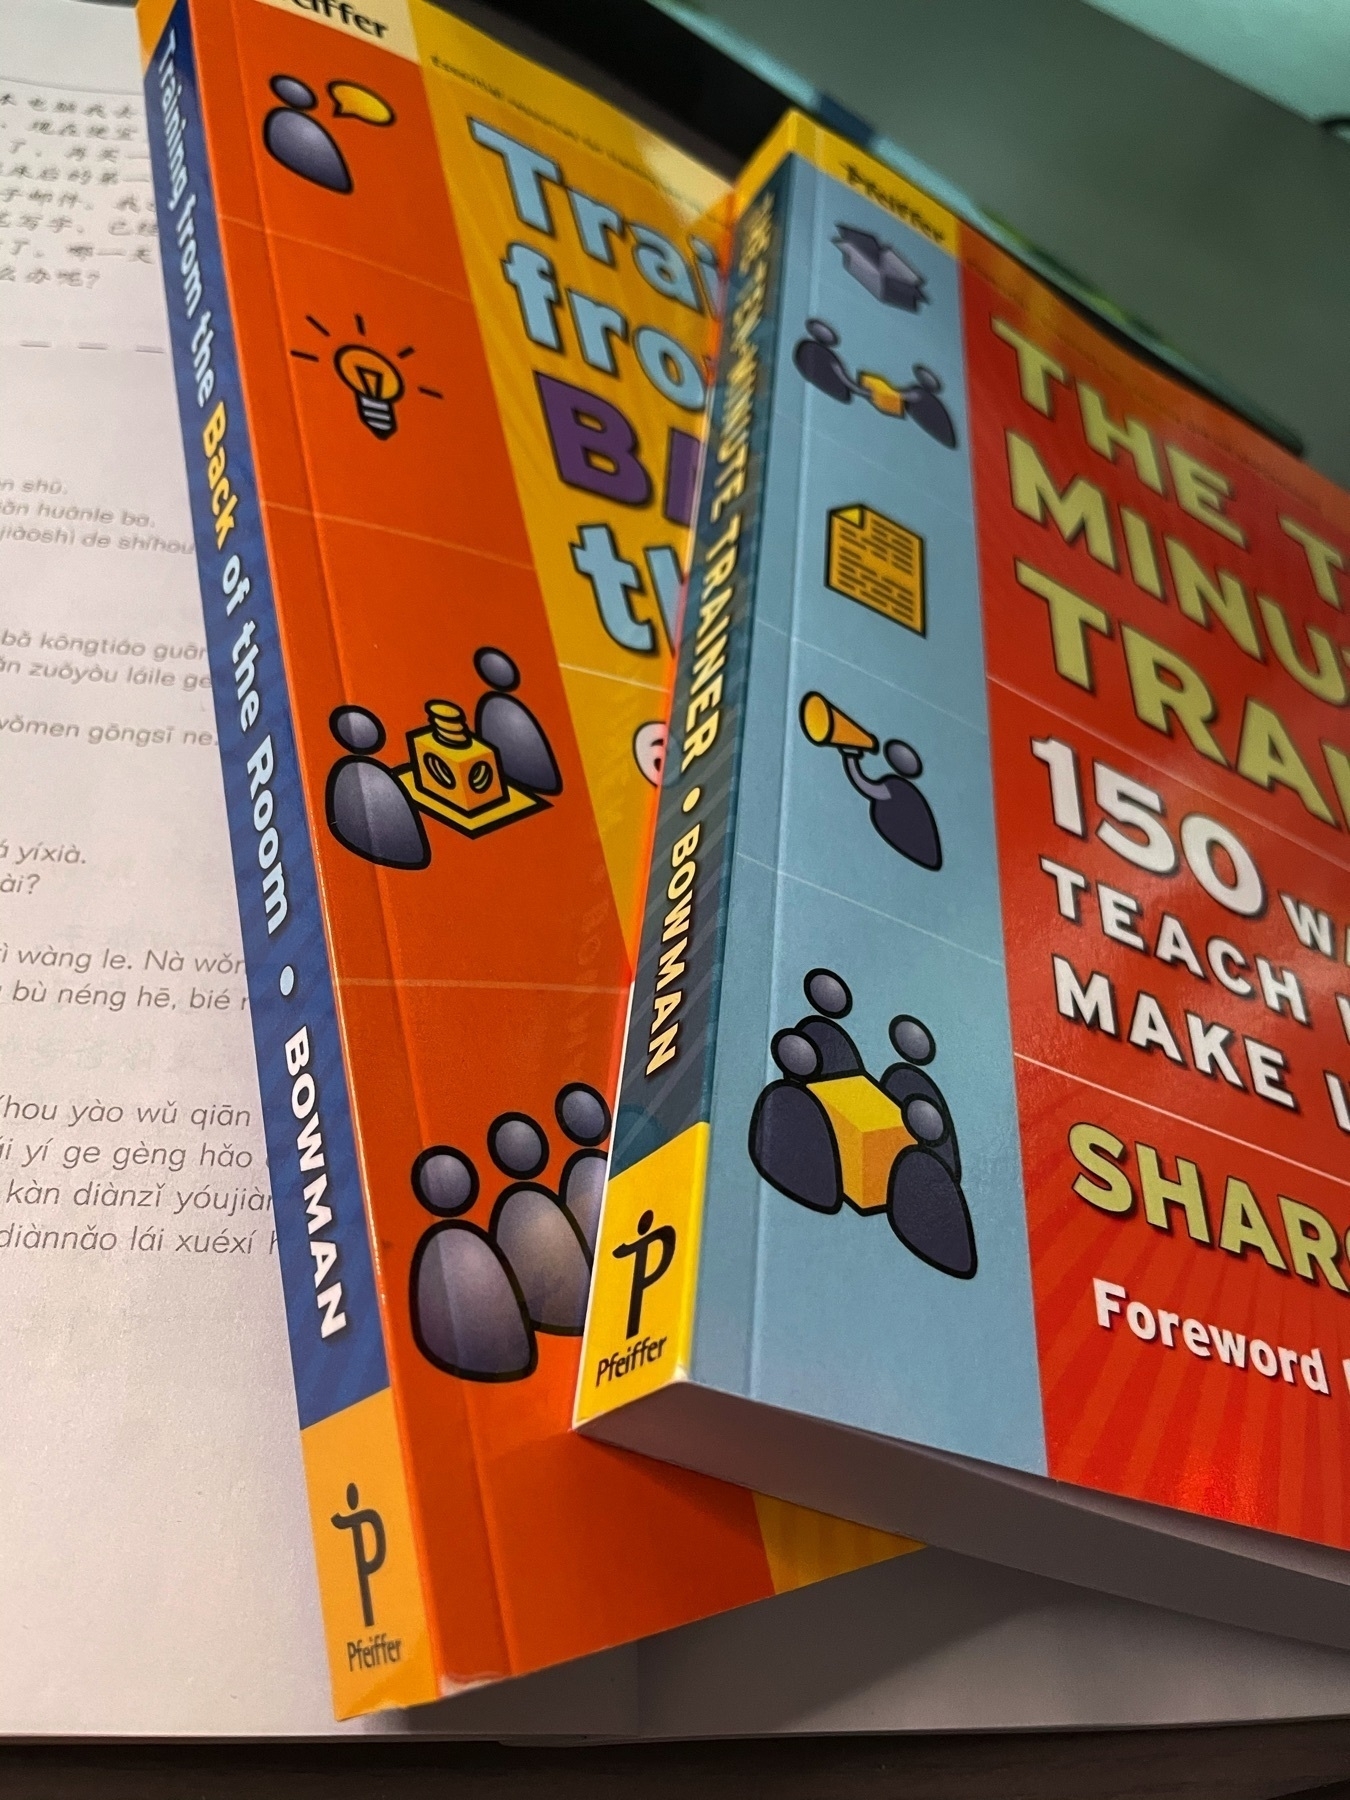 Books: Ten minute trainer and Teaching from the Back of the Room on top of each other